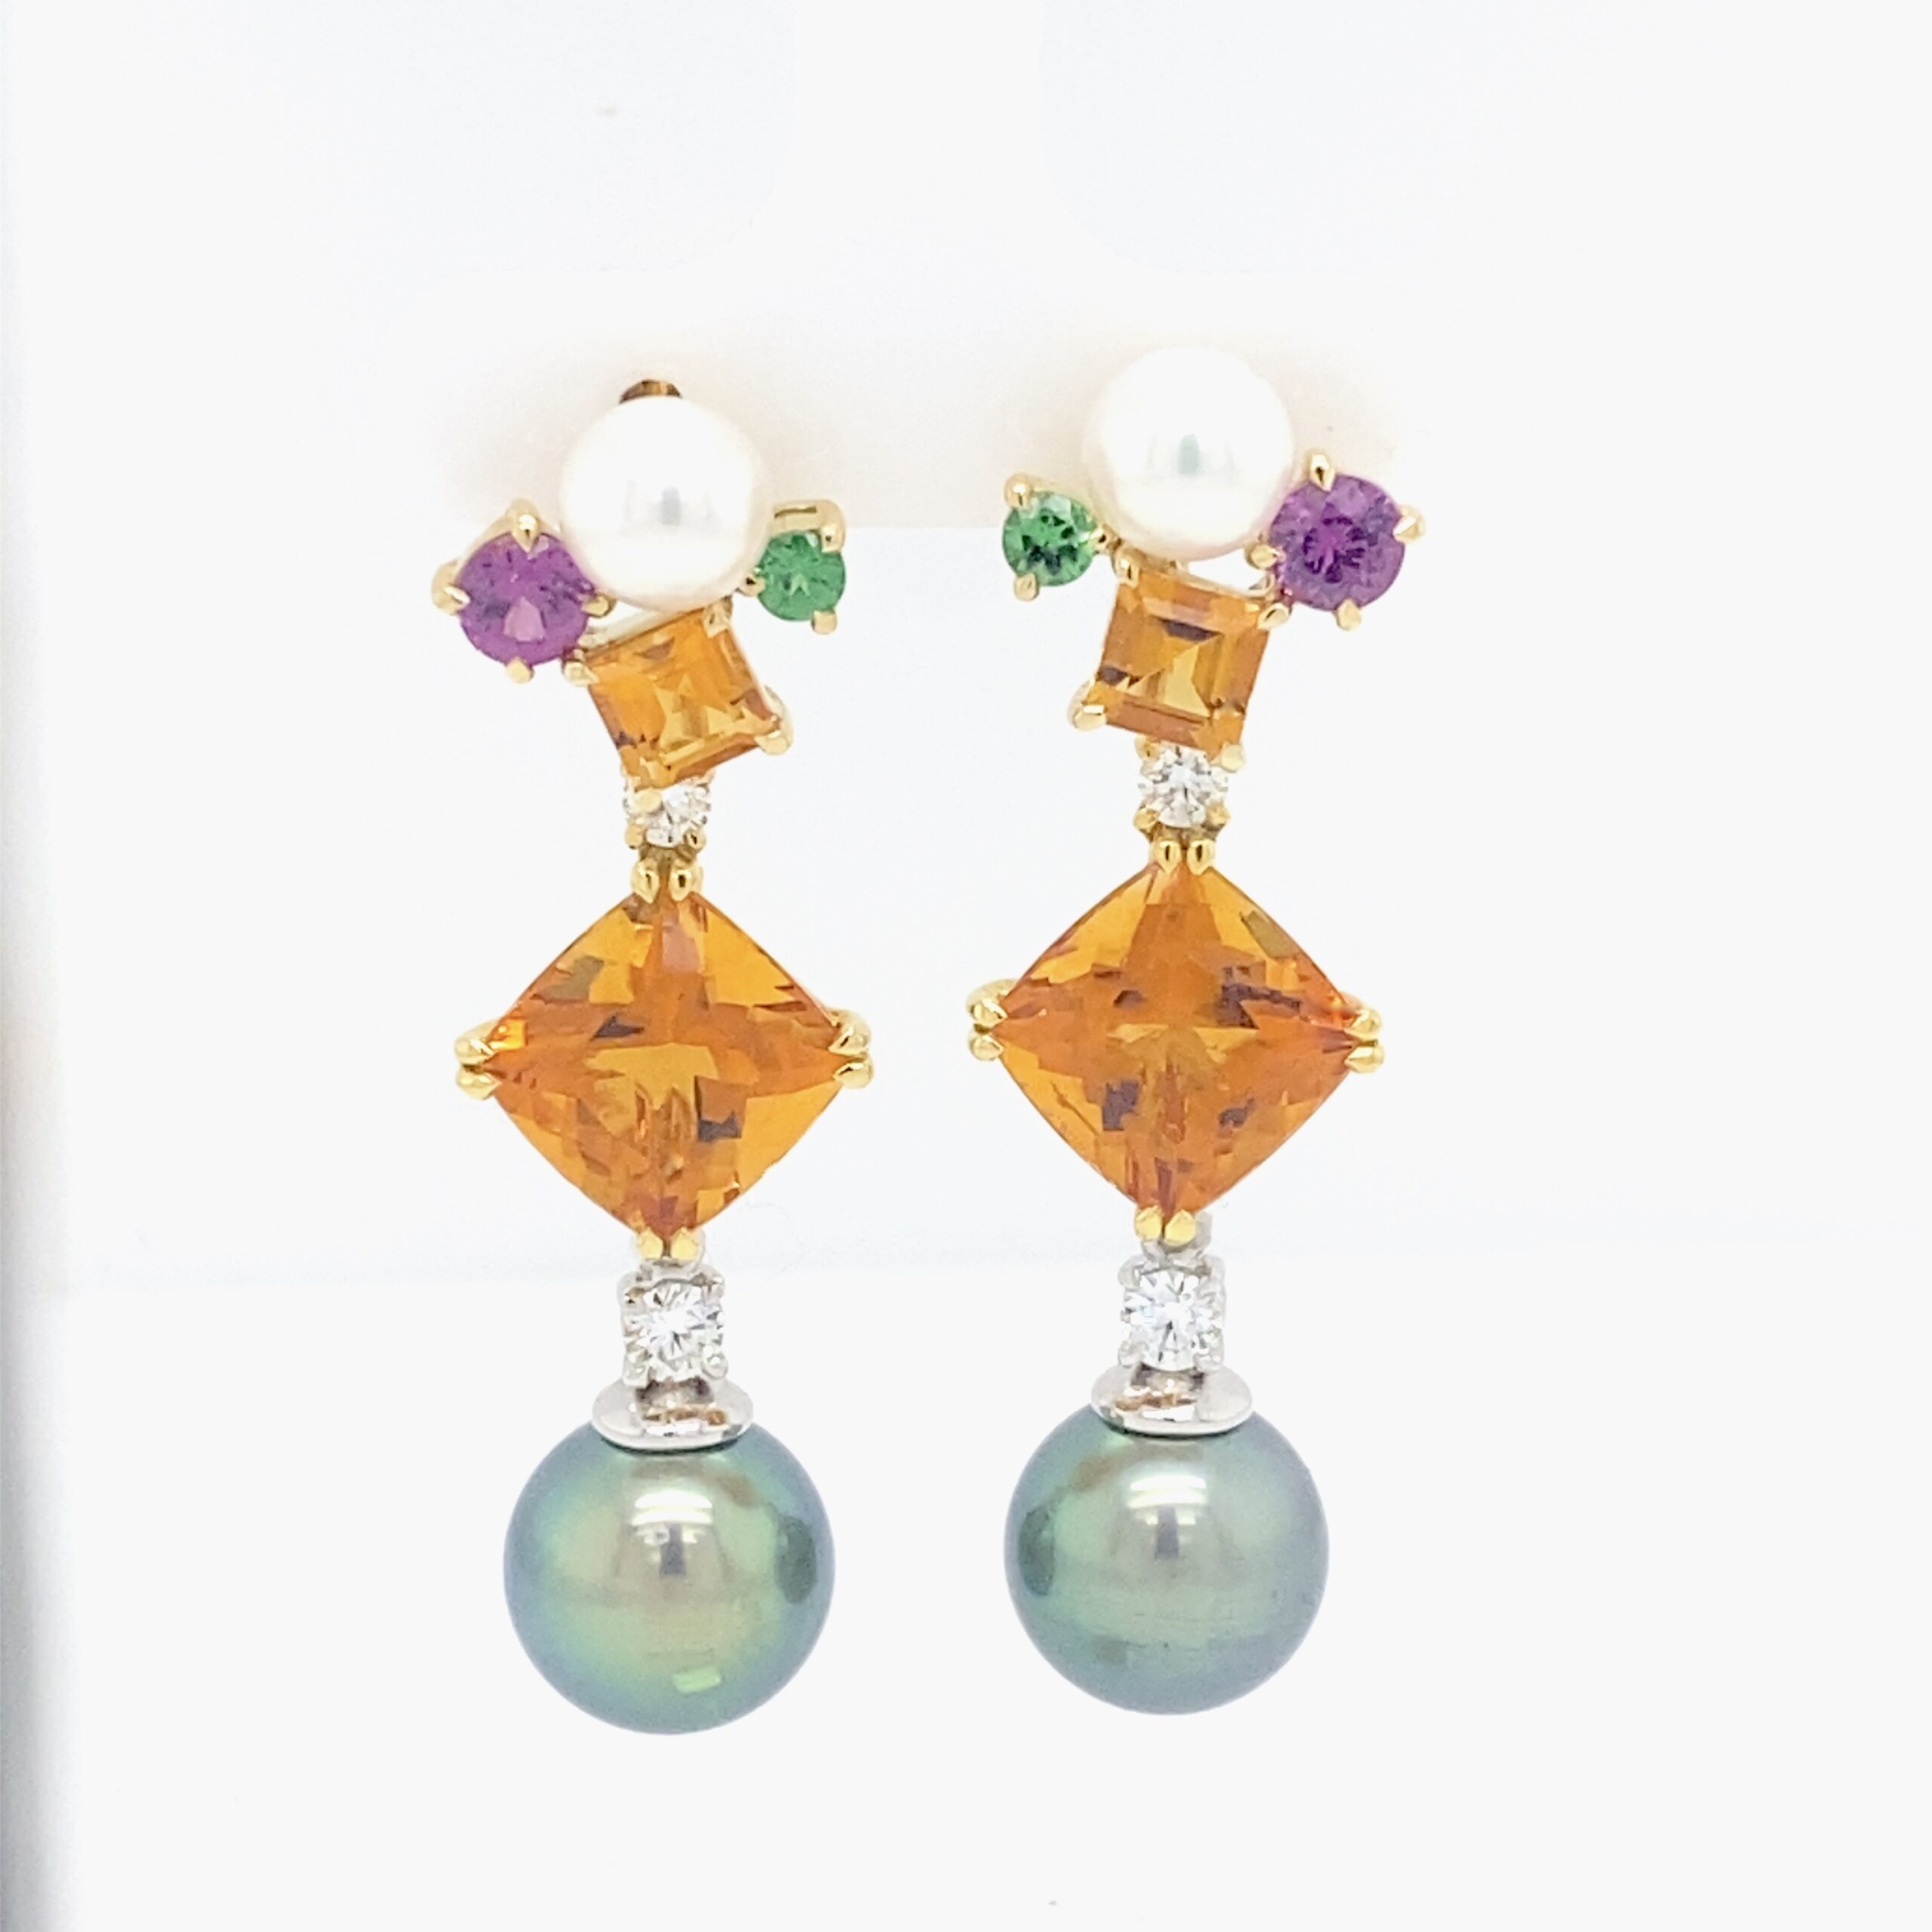 Scintilla earring with Citrine, Spessartine Garnet and Tsavorite Garnet and Pearl with square Citrine Gem Drops, Tahitian Pearl and Diamond Drop Adapter